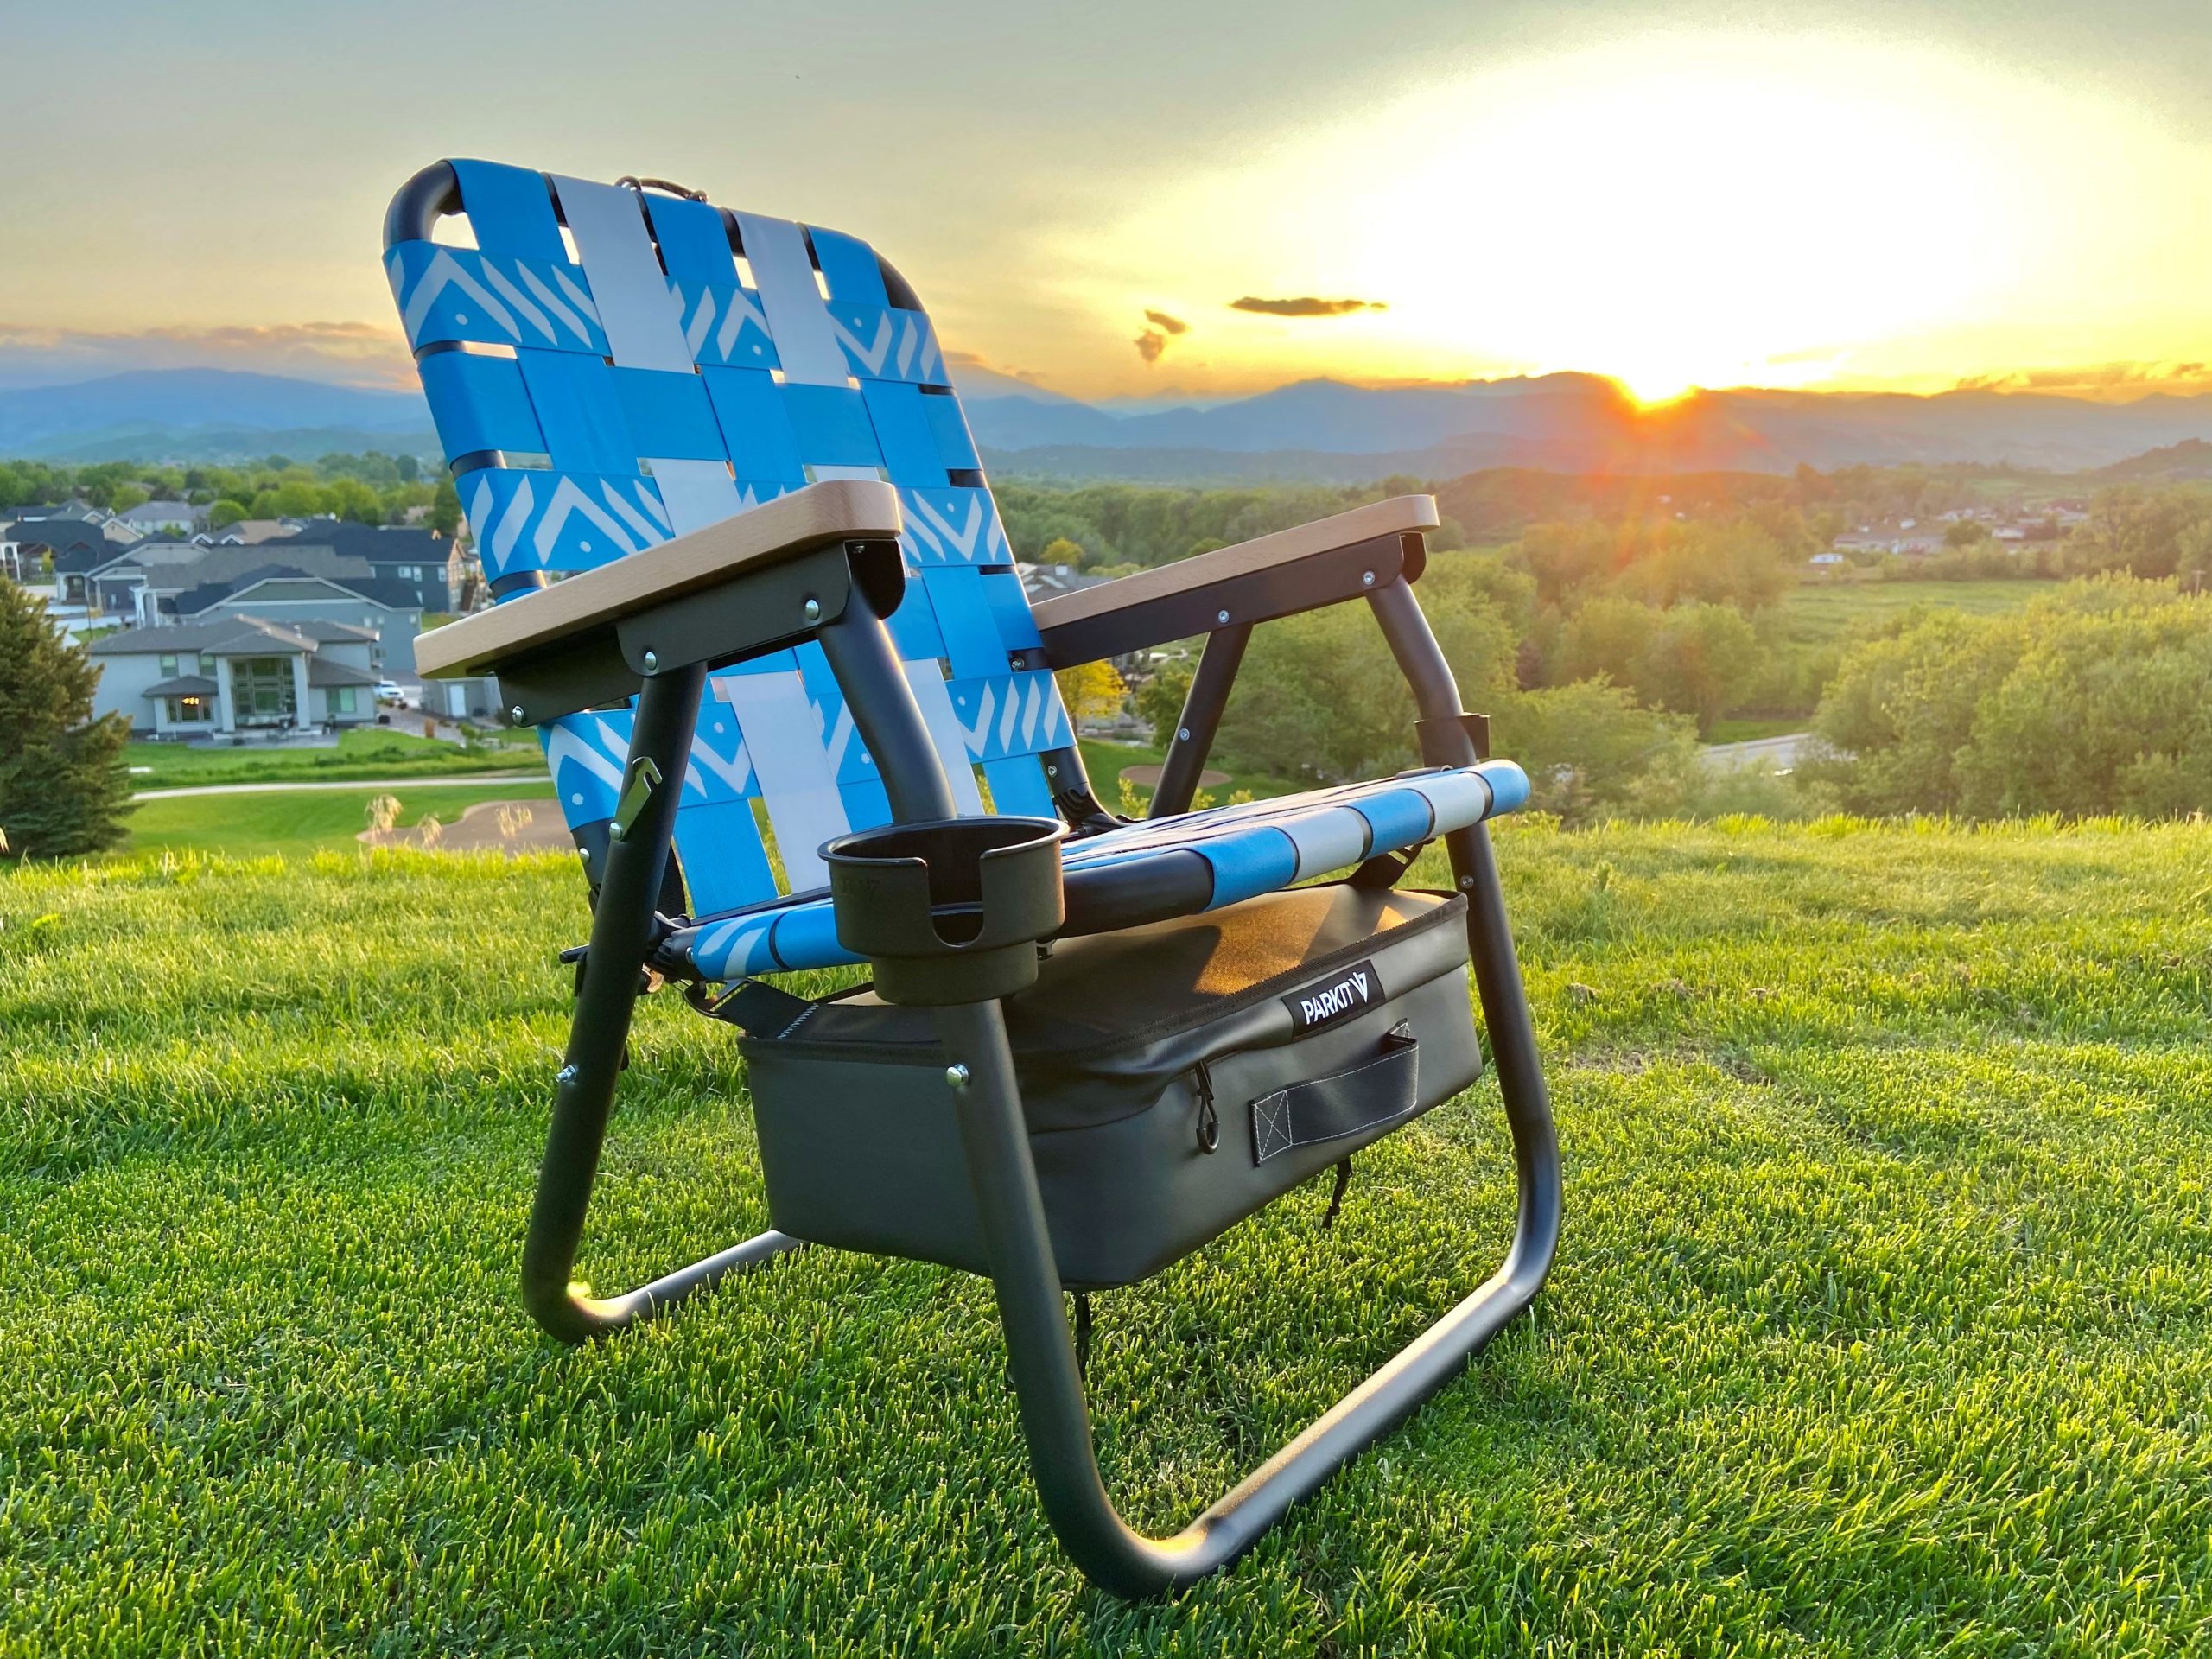 VOYAGER - The Ultimate Outdoor Chair